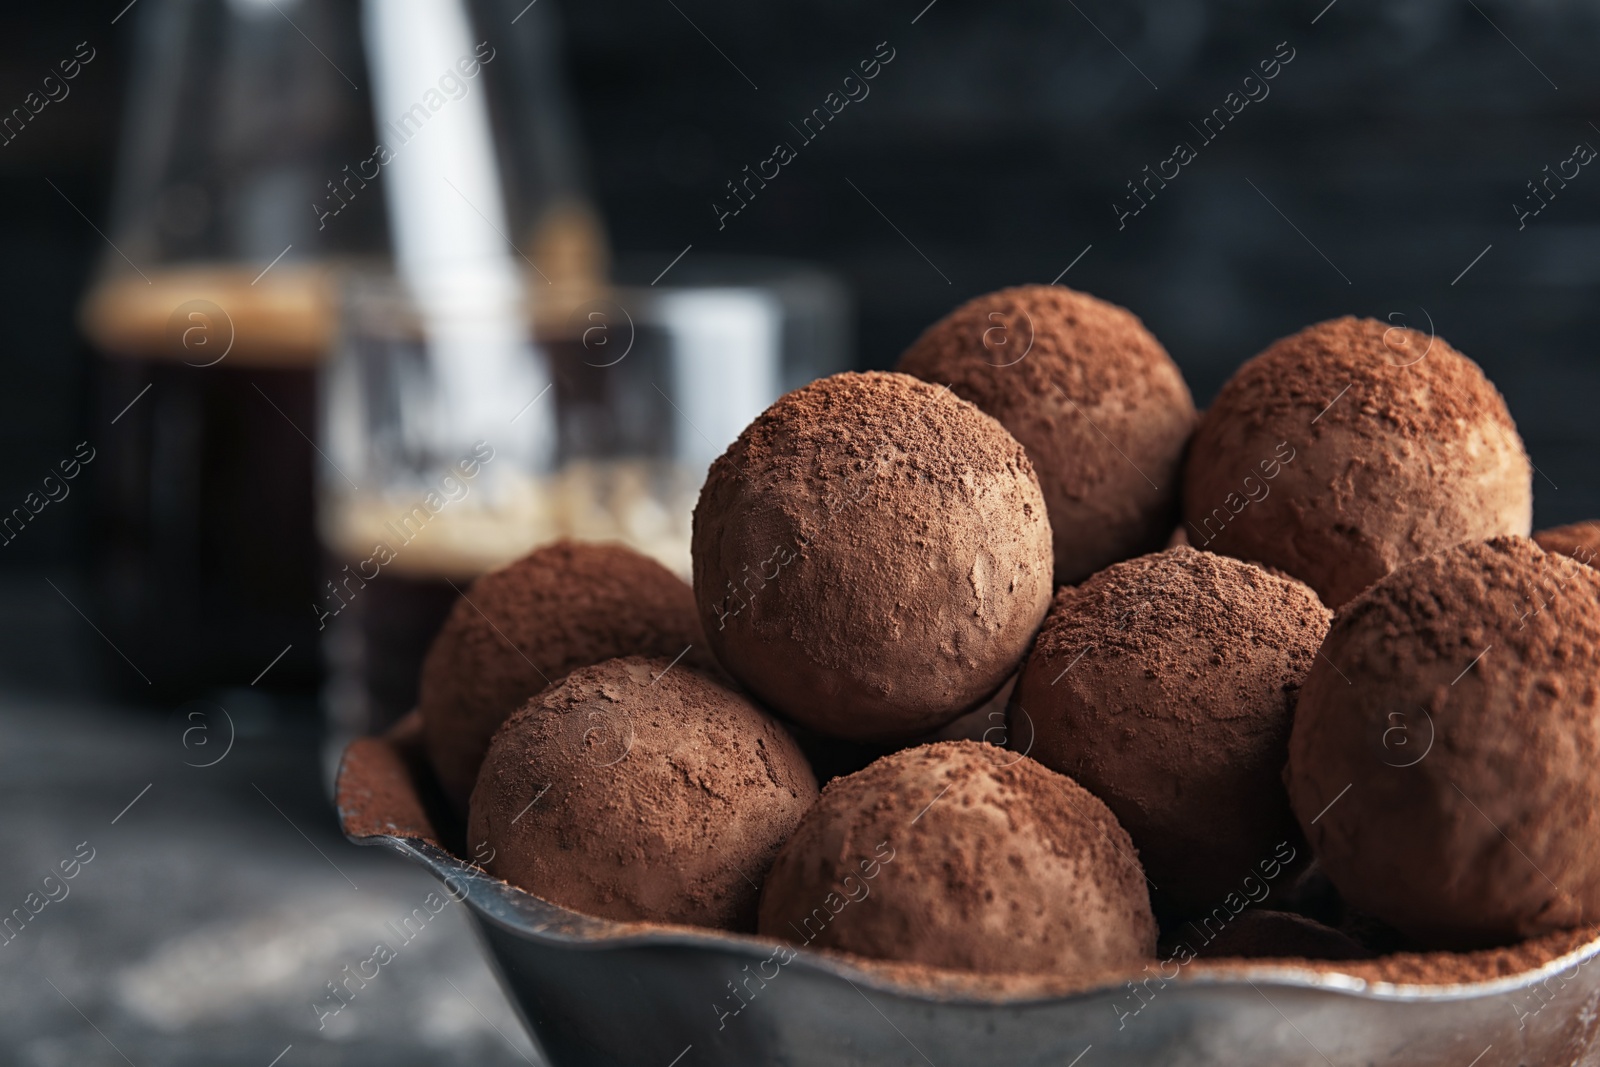 Photo of Bowl with tasty chocolate truffles, closeup view